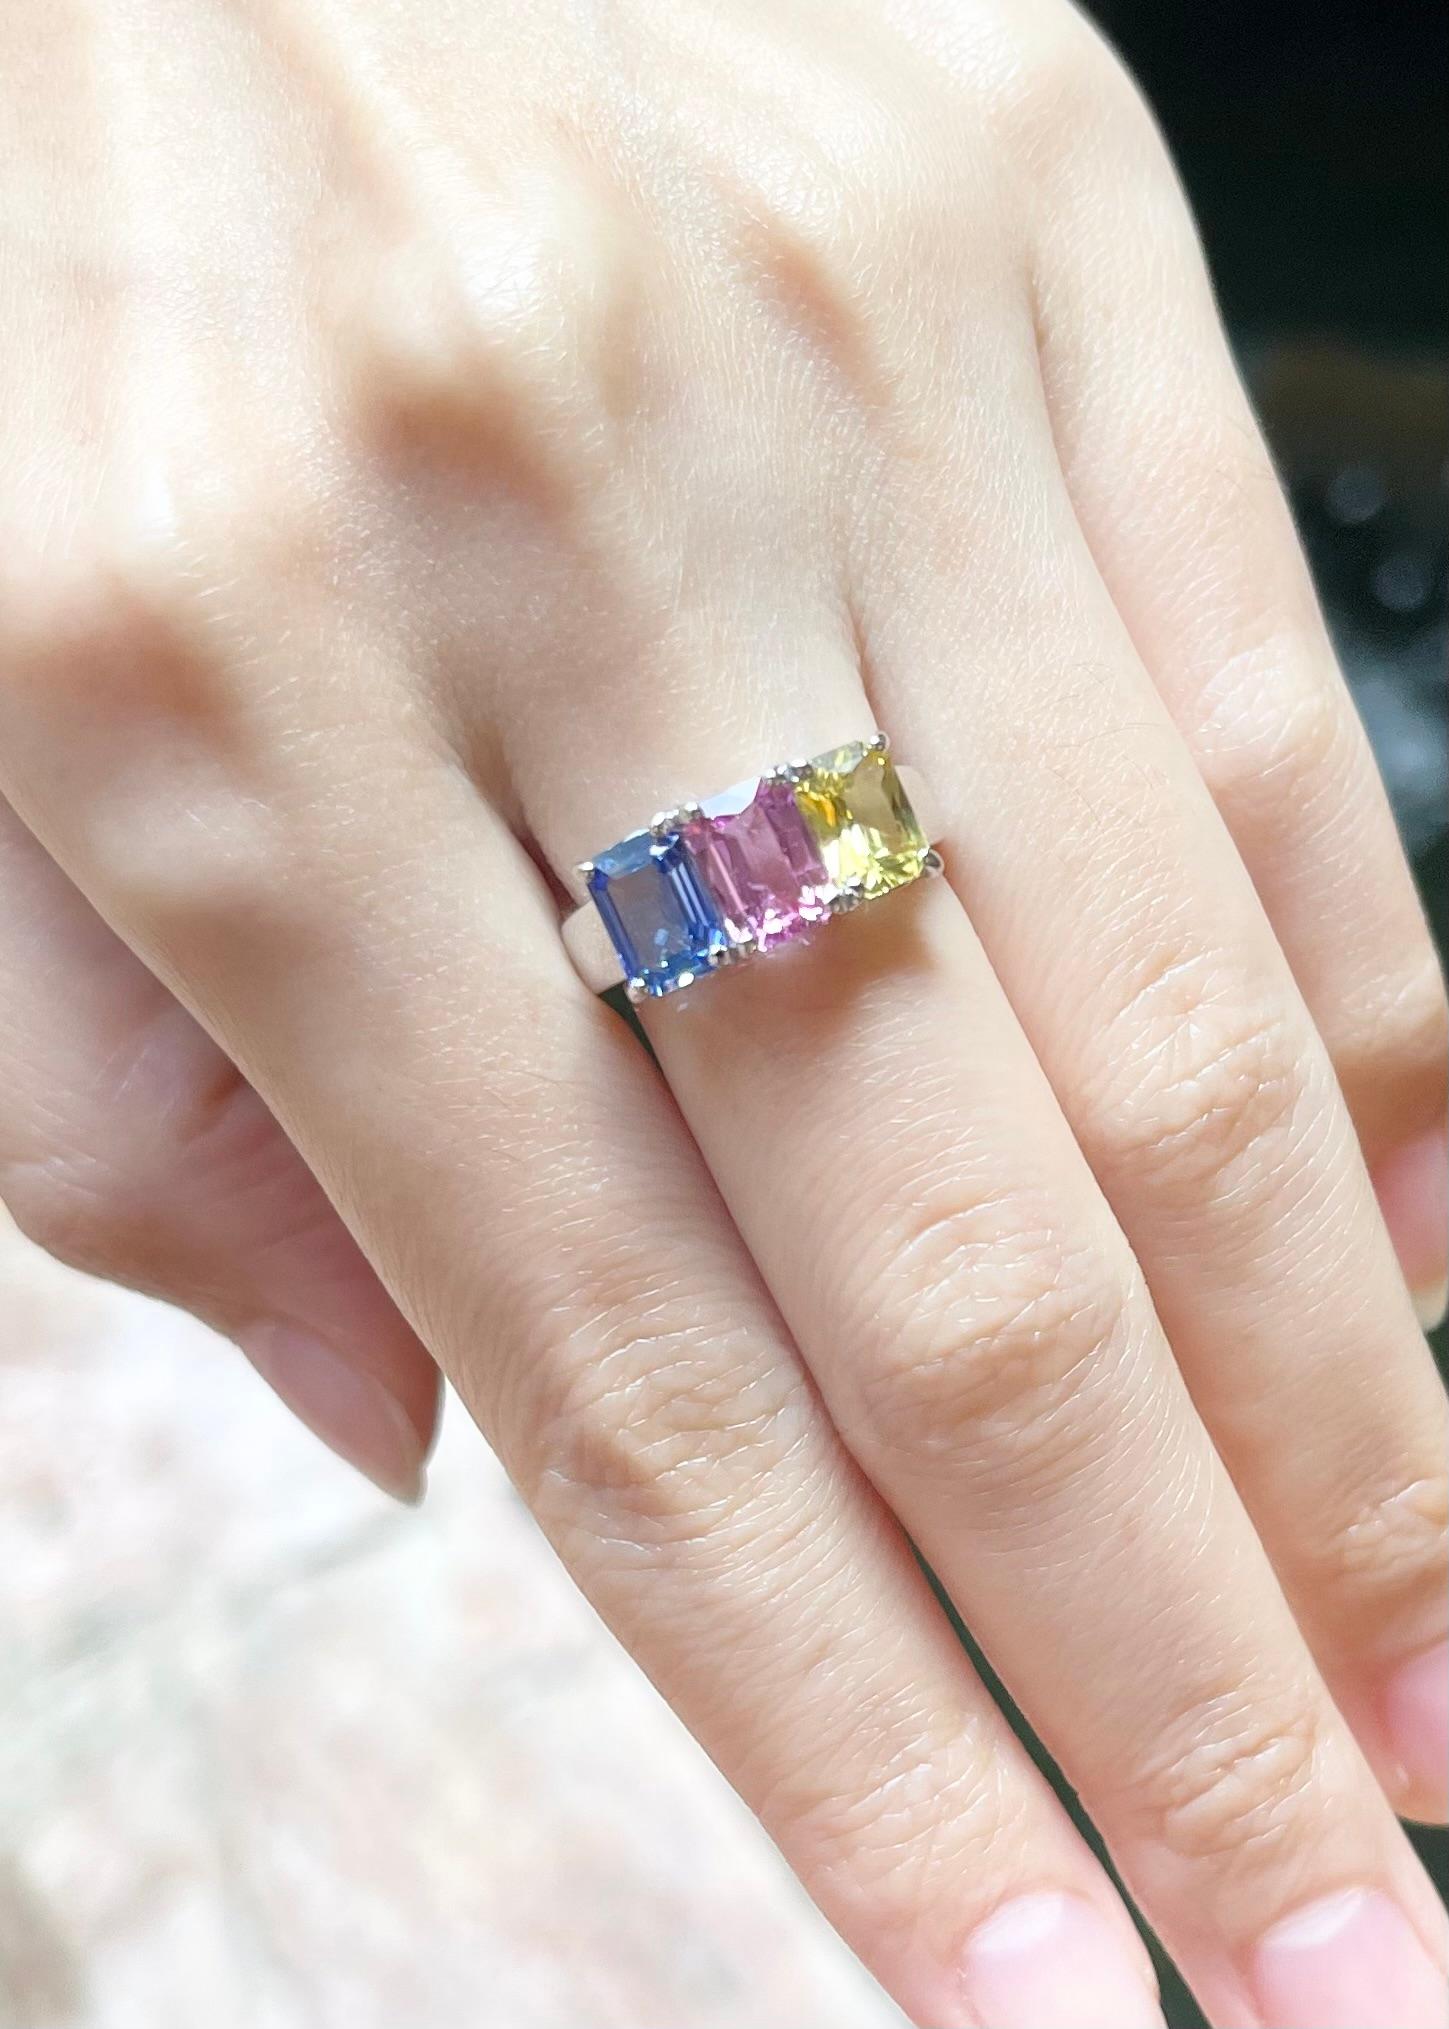 Emerald Cut Blue Sapphire, Pink Sapphire and Yellow Sapphire Ring set in Platinum 900 For Sale